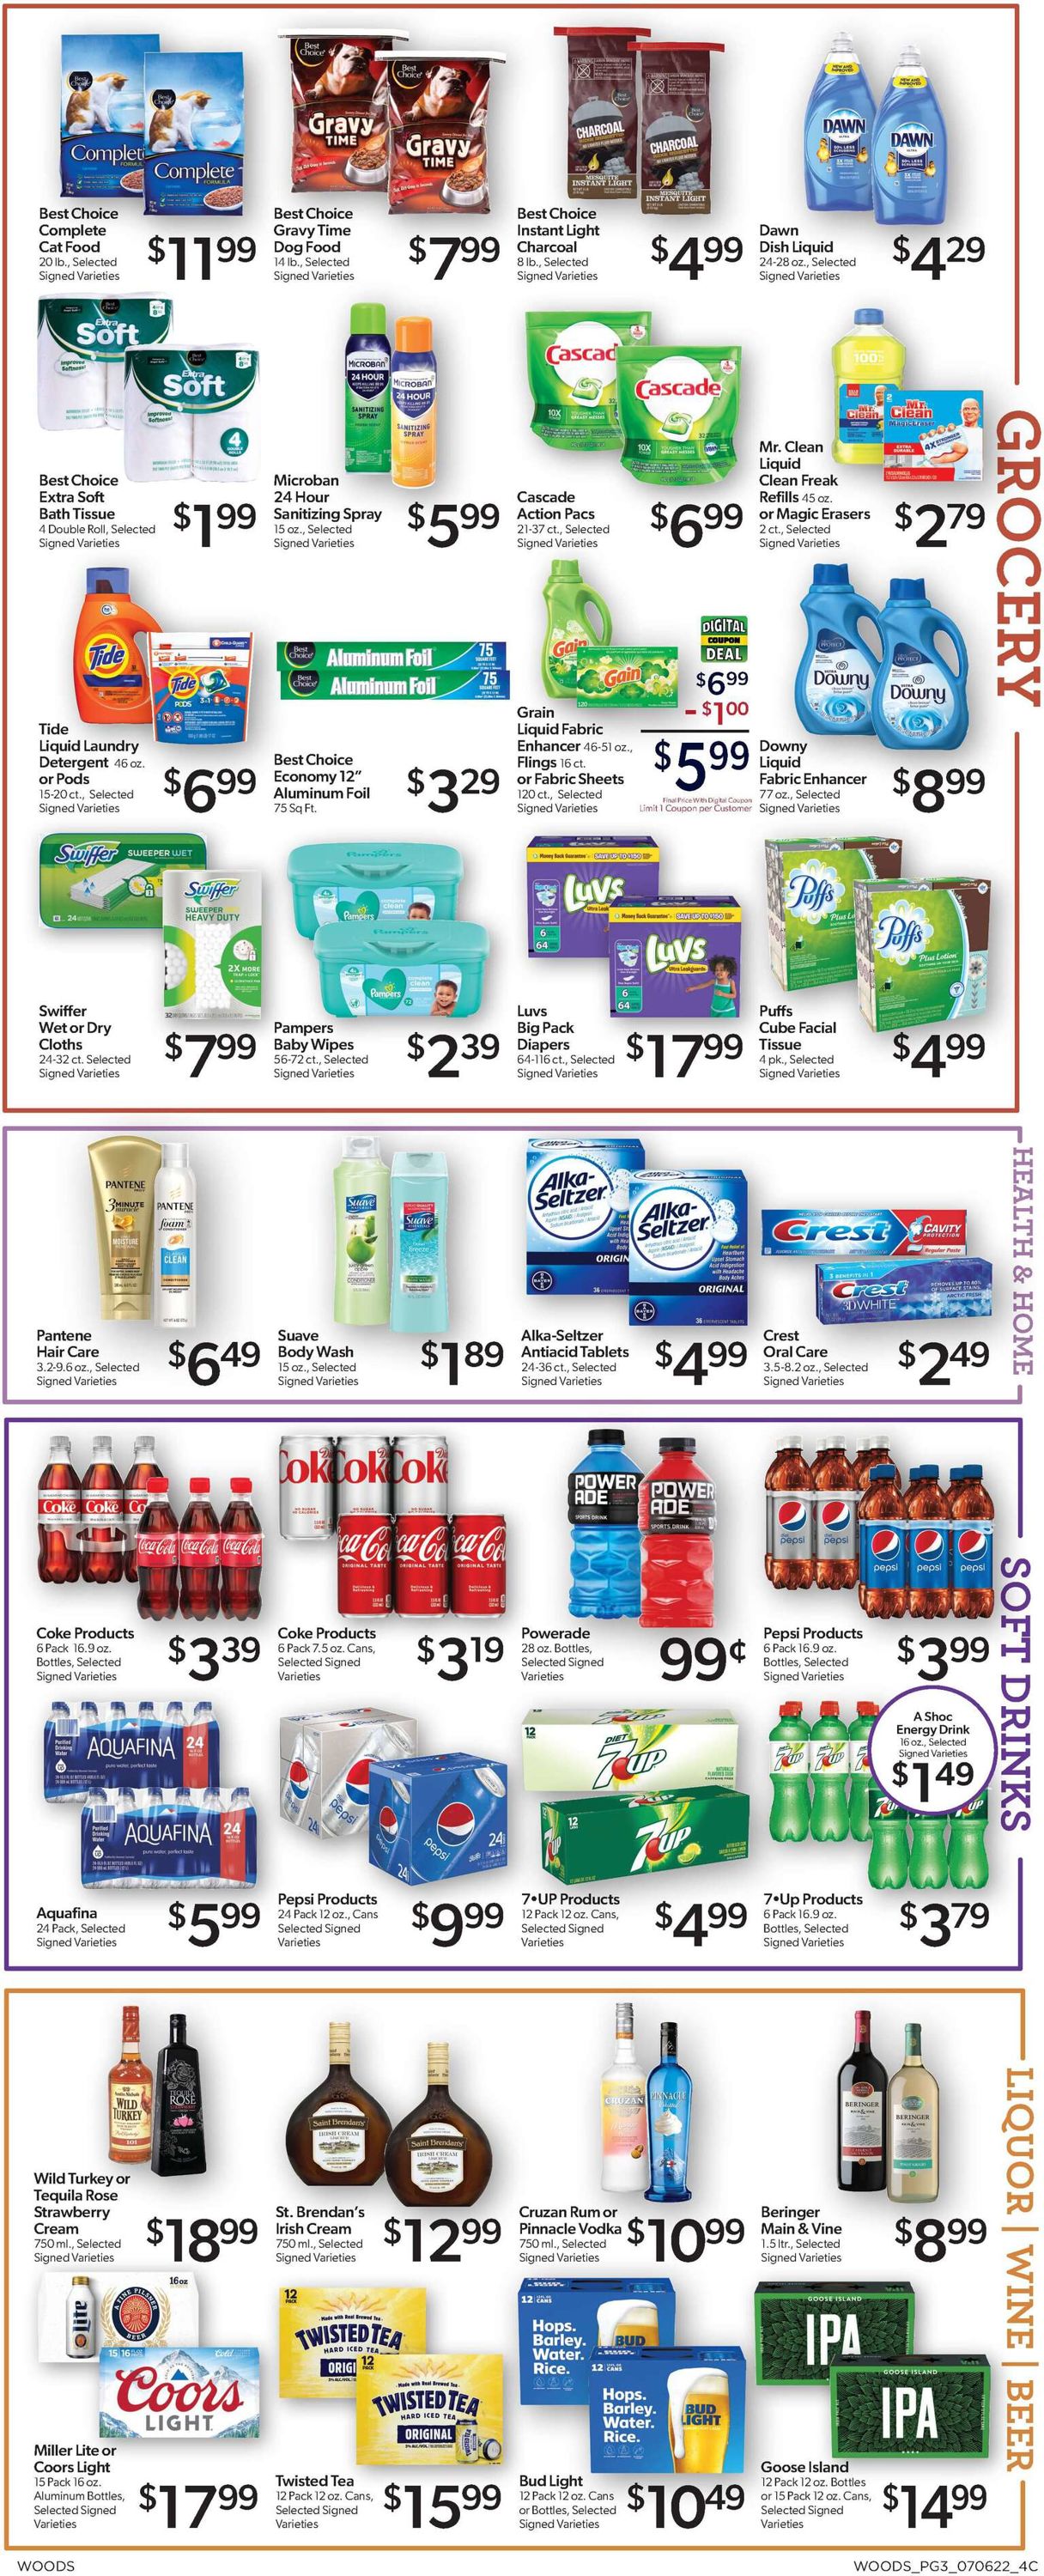 Woods Supermarket Ad from 07/06/2022